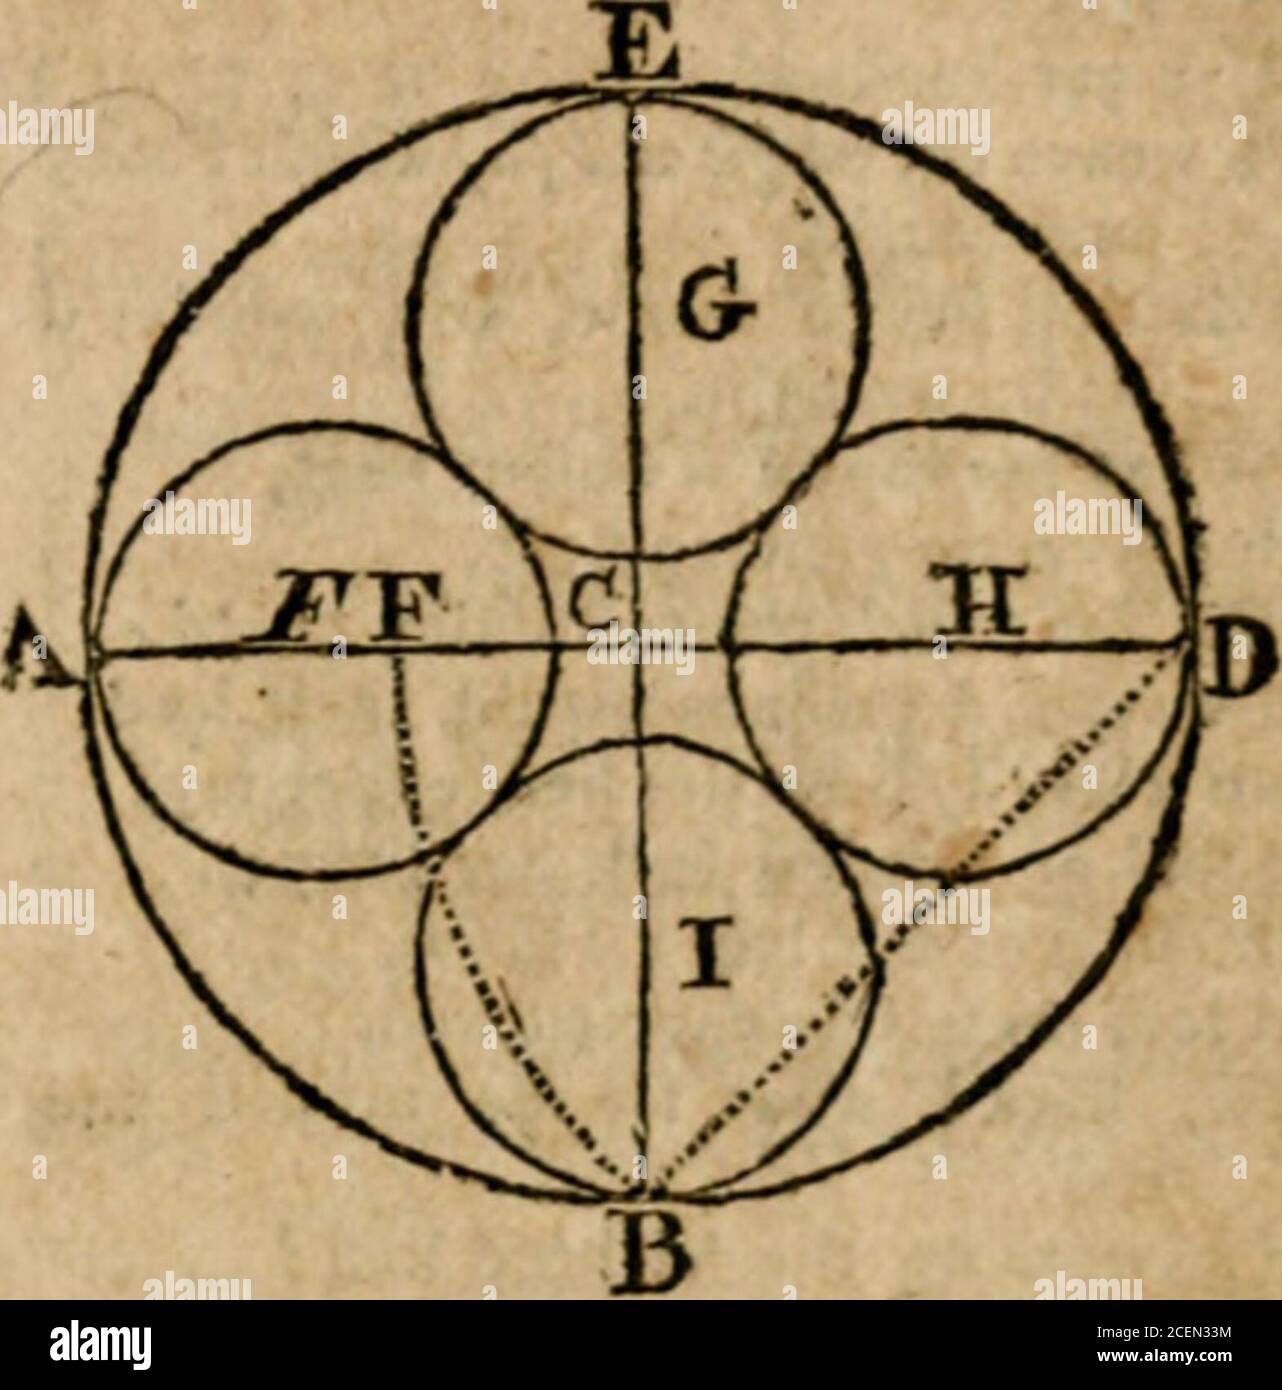 . The Columbian magazine : or, monthly miscellany. iJy ; and the difference of longitude 9** i^ . Solution of ^ejiion III. Let the circle A B D E rcpre-fent the given large bottom ; whichdivide into four equul parts by thetwo diameters AD and EB ; laythe length of DB from D to F :Then the diftance from the centerC to F is the radius of each of thefour equal circles ; which being feeoff from the points A, B, D, an.i E,will find Ff I, H, and G, the cen-tres of the circles required. From the conftru6lion it appears,that the radius of each of the fmallcircles, is the excefs of the chord ofa quad Stock Photo